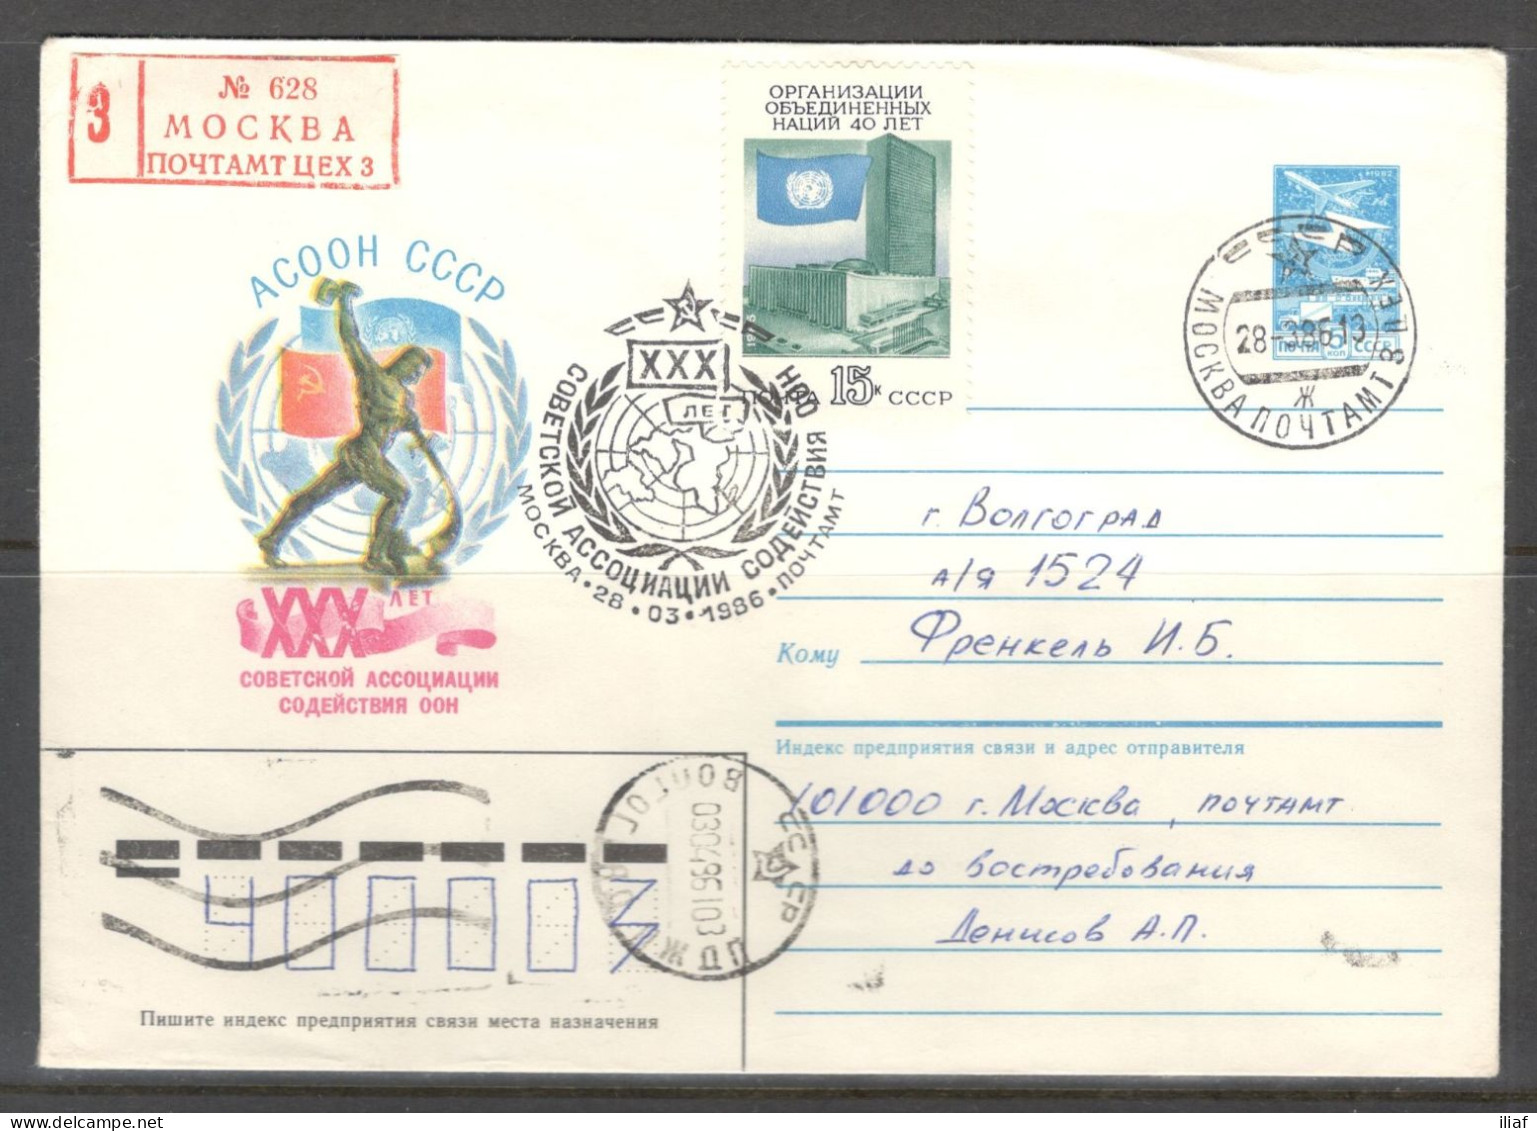 RUSSIA & USSR. 30 Years Of The United Nations Association Of The Soviet Union.  Illustrated Envelope With Special Cancel - UNO